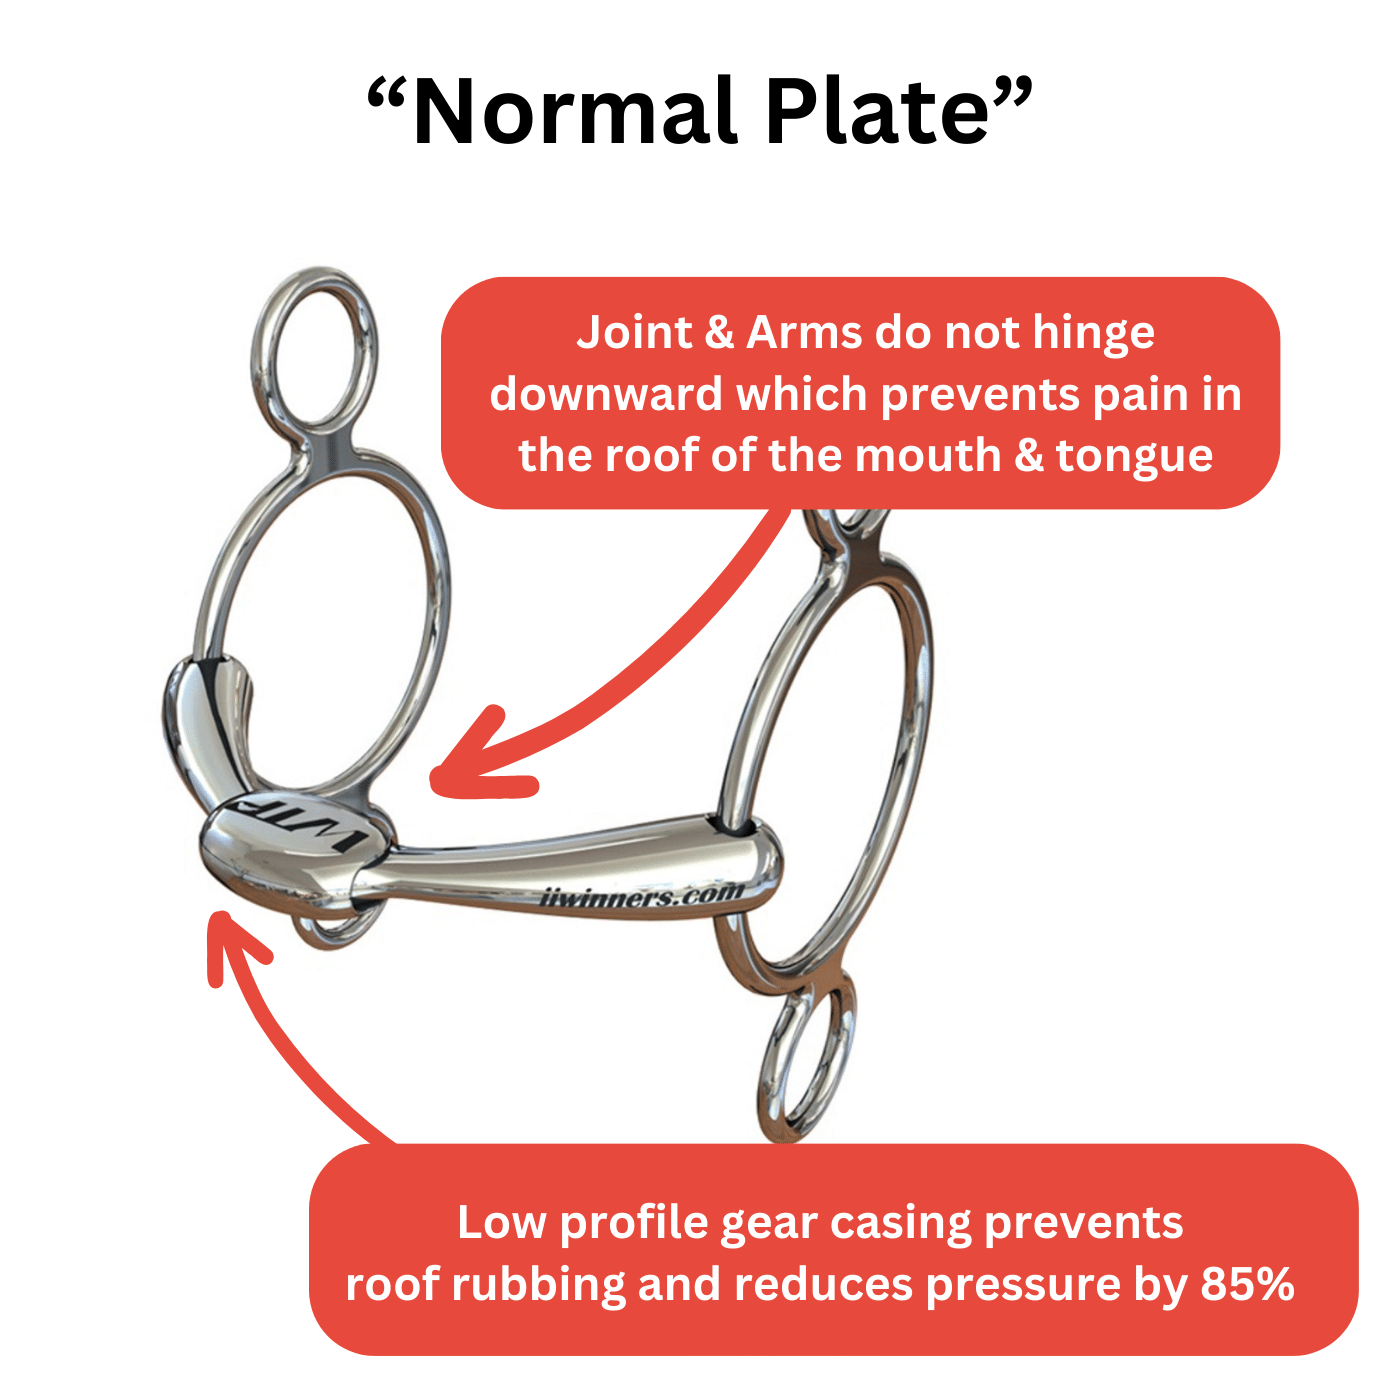 WTP (Winning Tongue Plate) 3 Ring Elevator Leverage Bit with Normal Plate